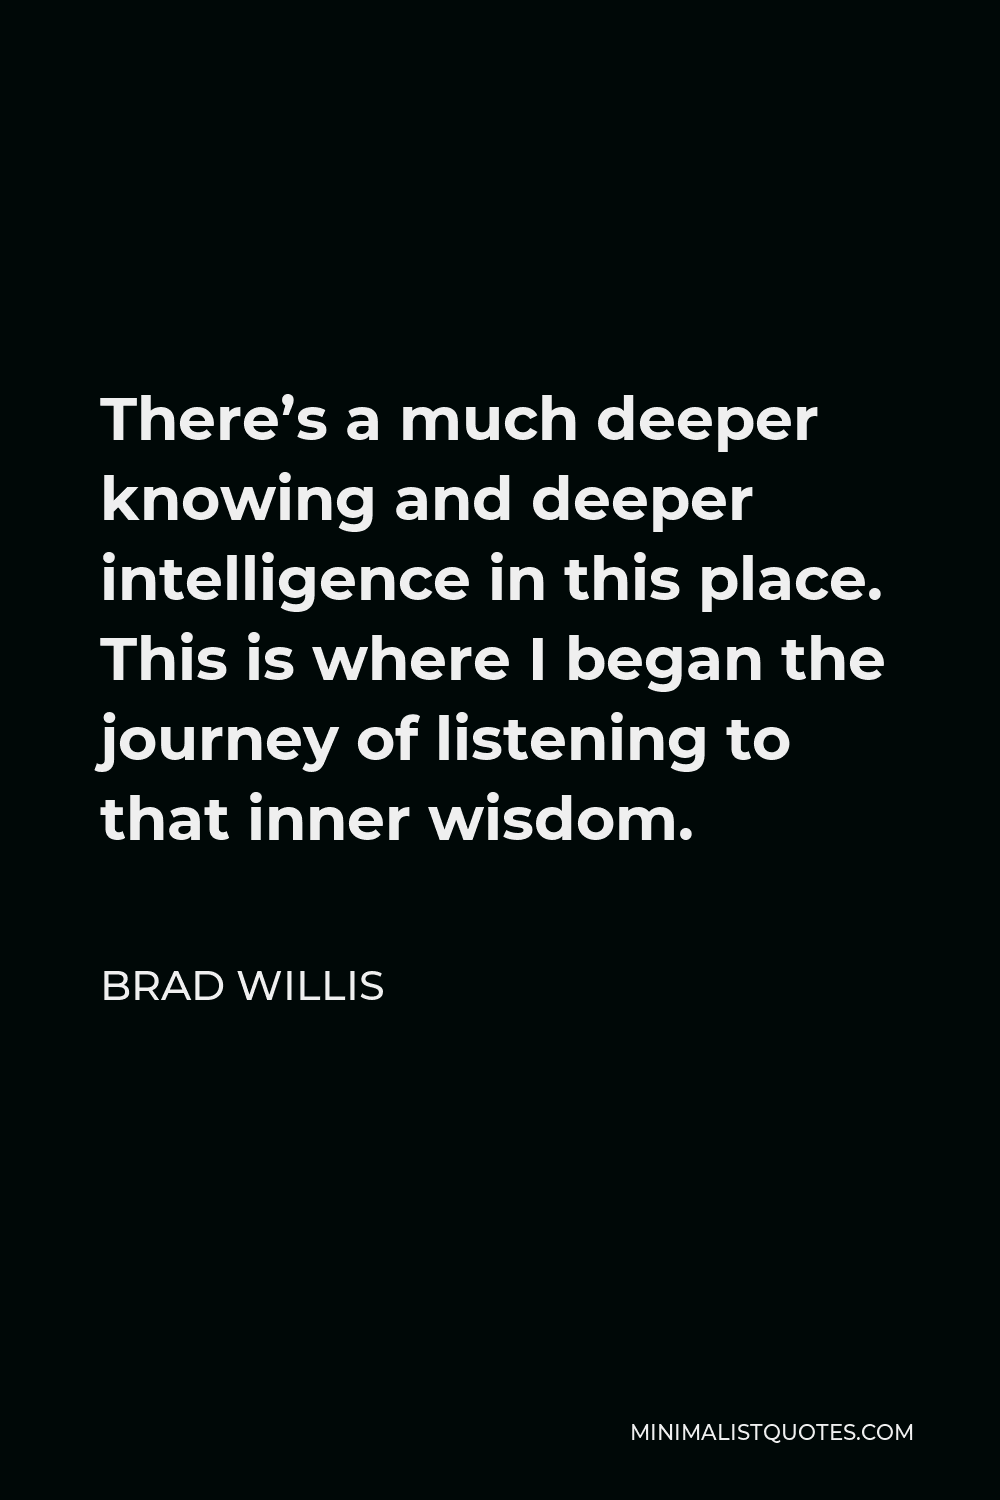 Brad Willis Quote - There’s a much deeper knowing and deeper intelligence in this place. This is where I began the journey of listening to that inner wisdom.